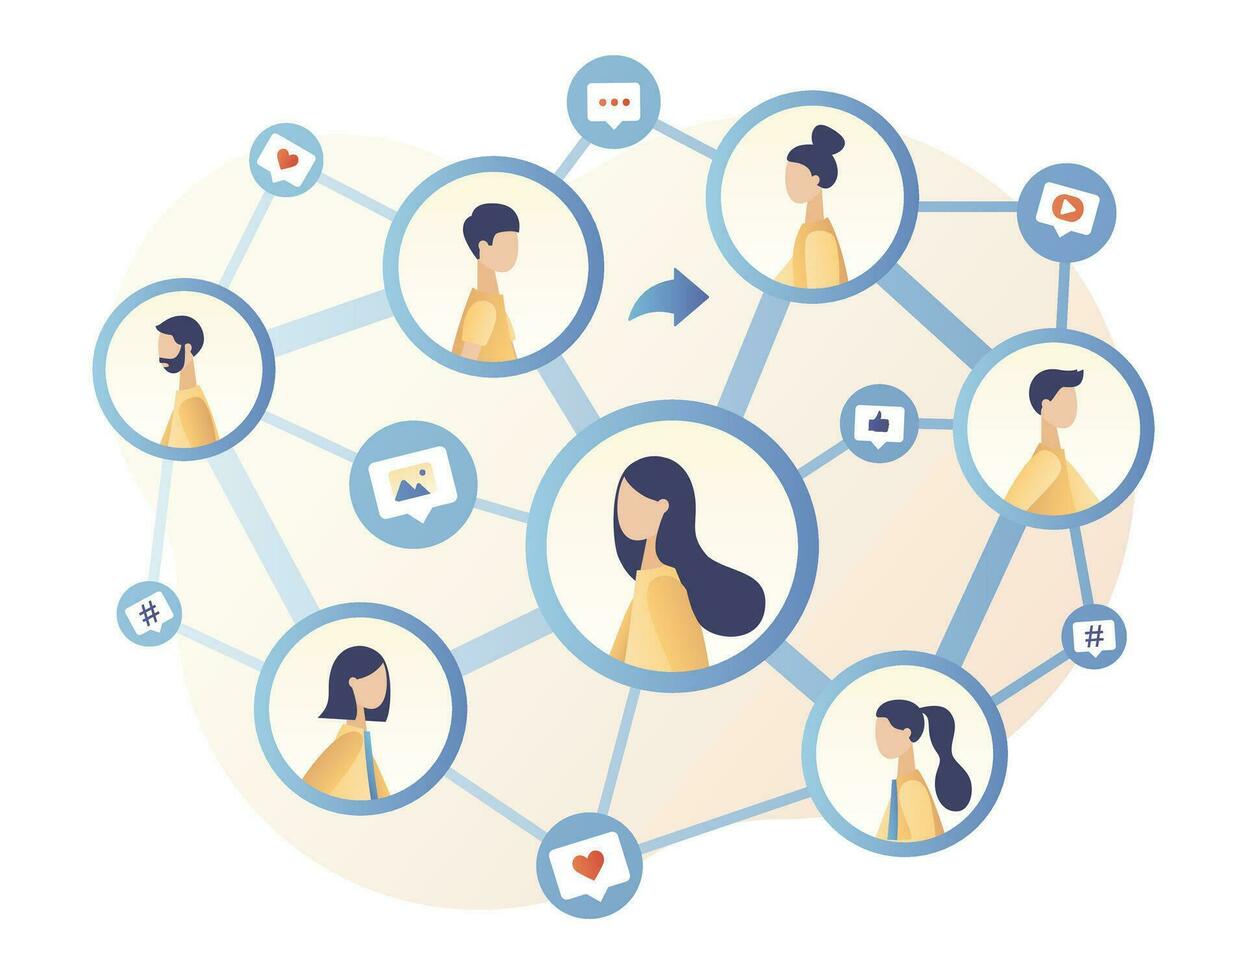 Social Networking. Share concept. Social media. Tiny people communicate sharing data, photos, links, posts and news in social networks. Modern flat cartoon style. Vector illustration